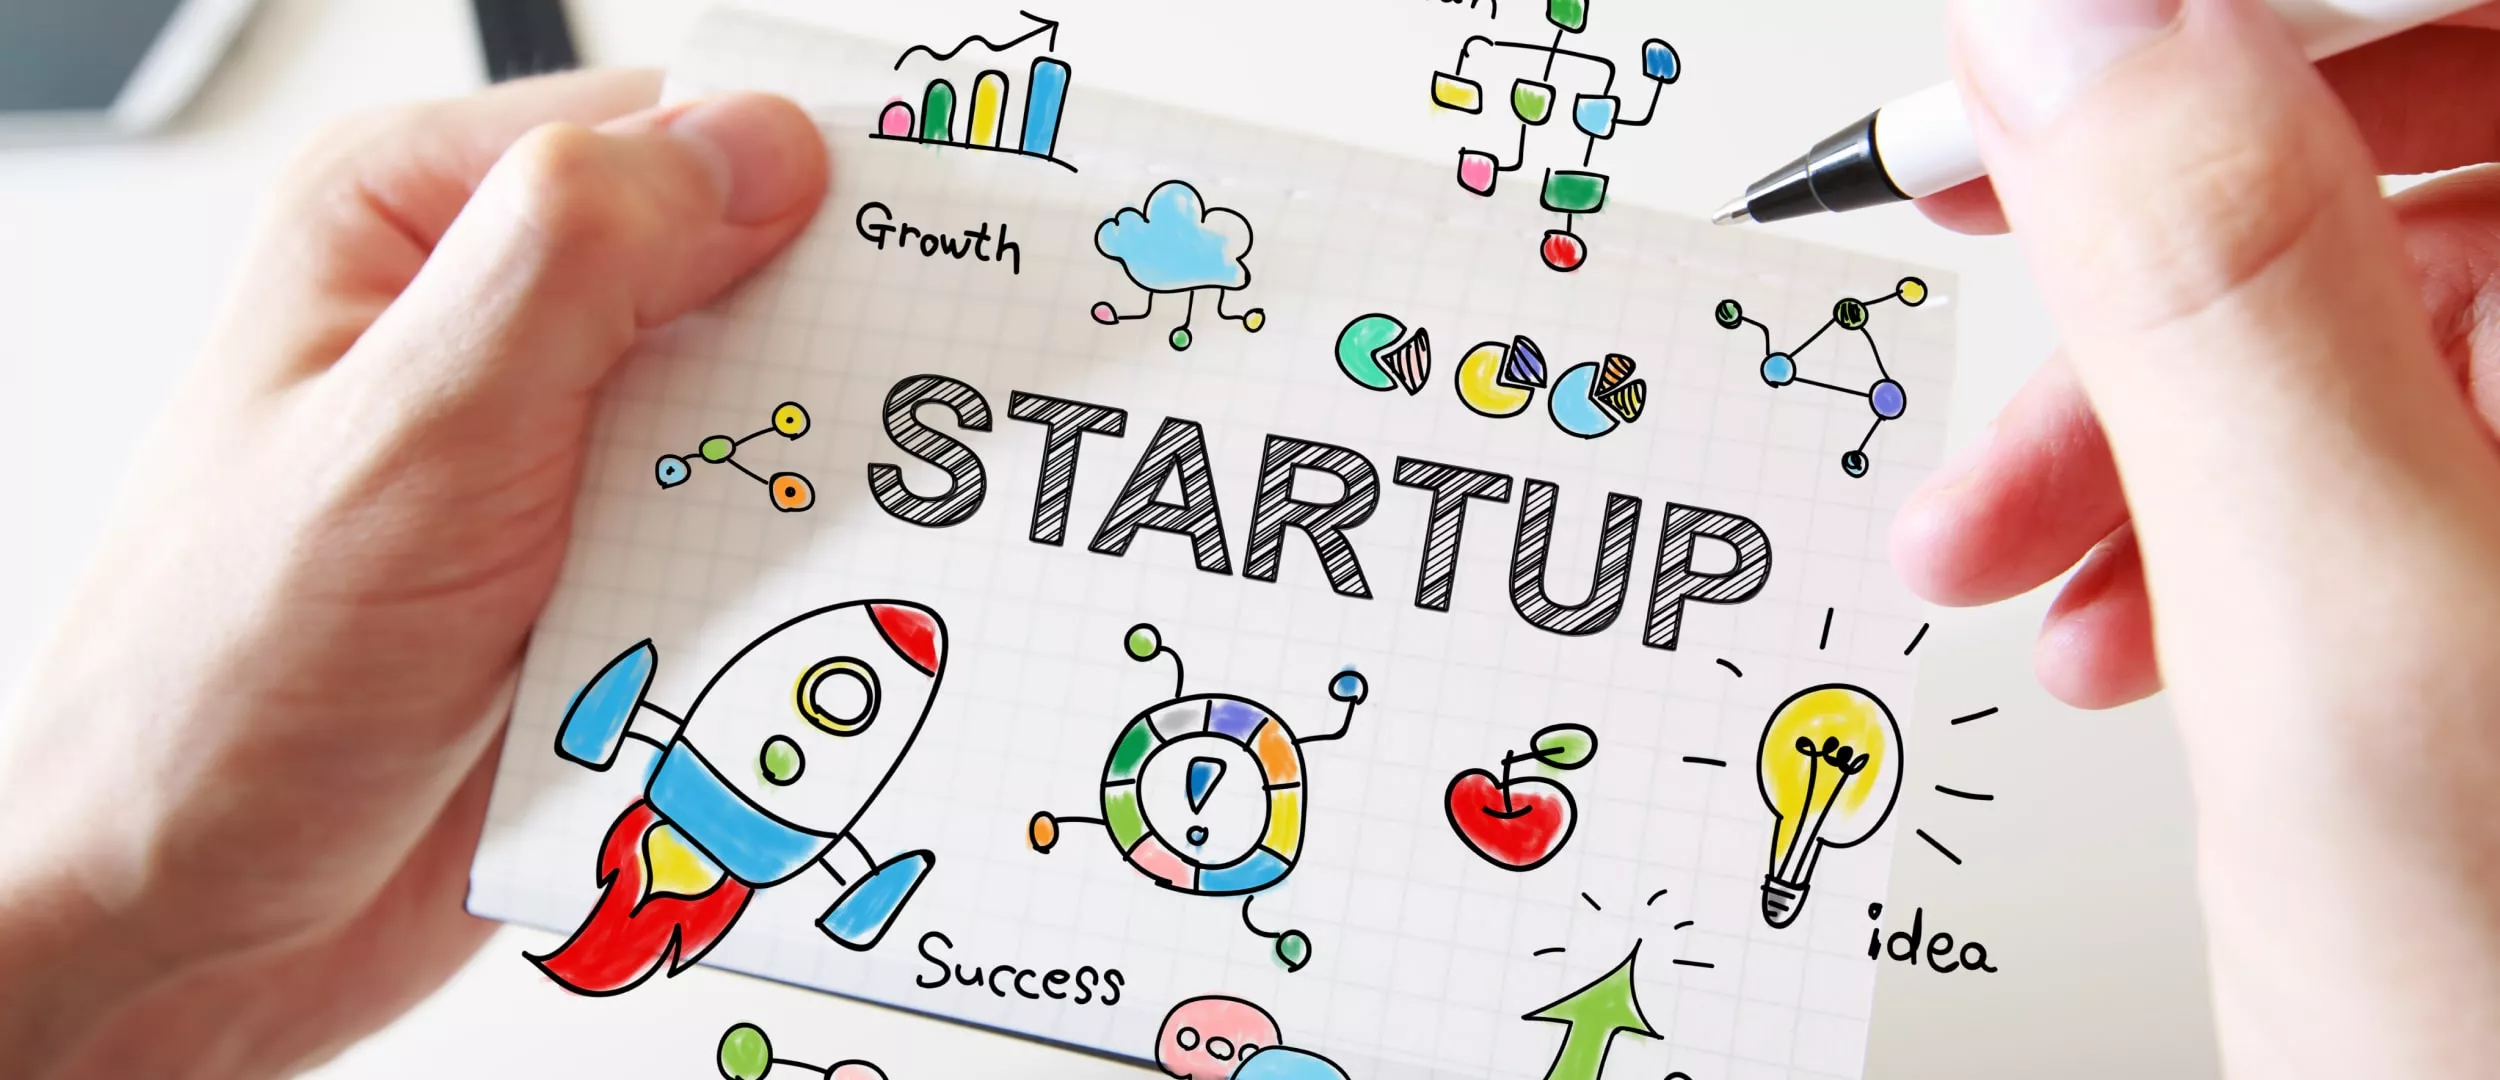 10 tips on getting real with your startup ideas